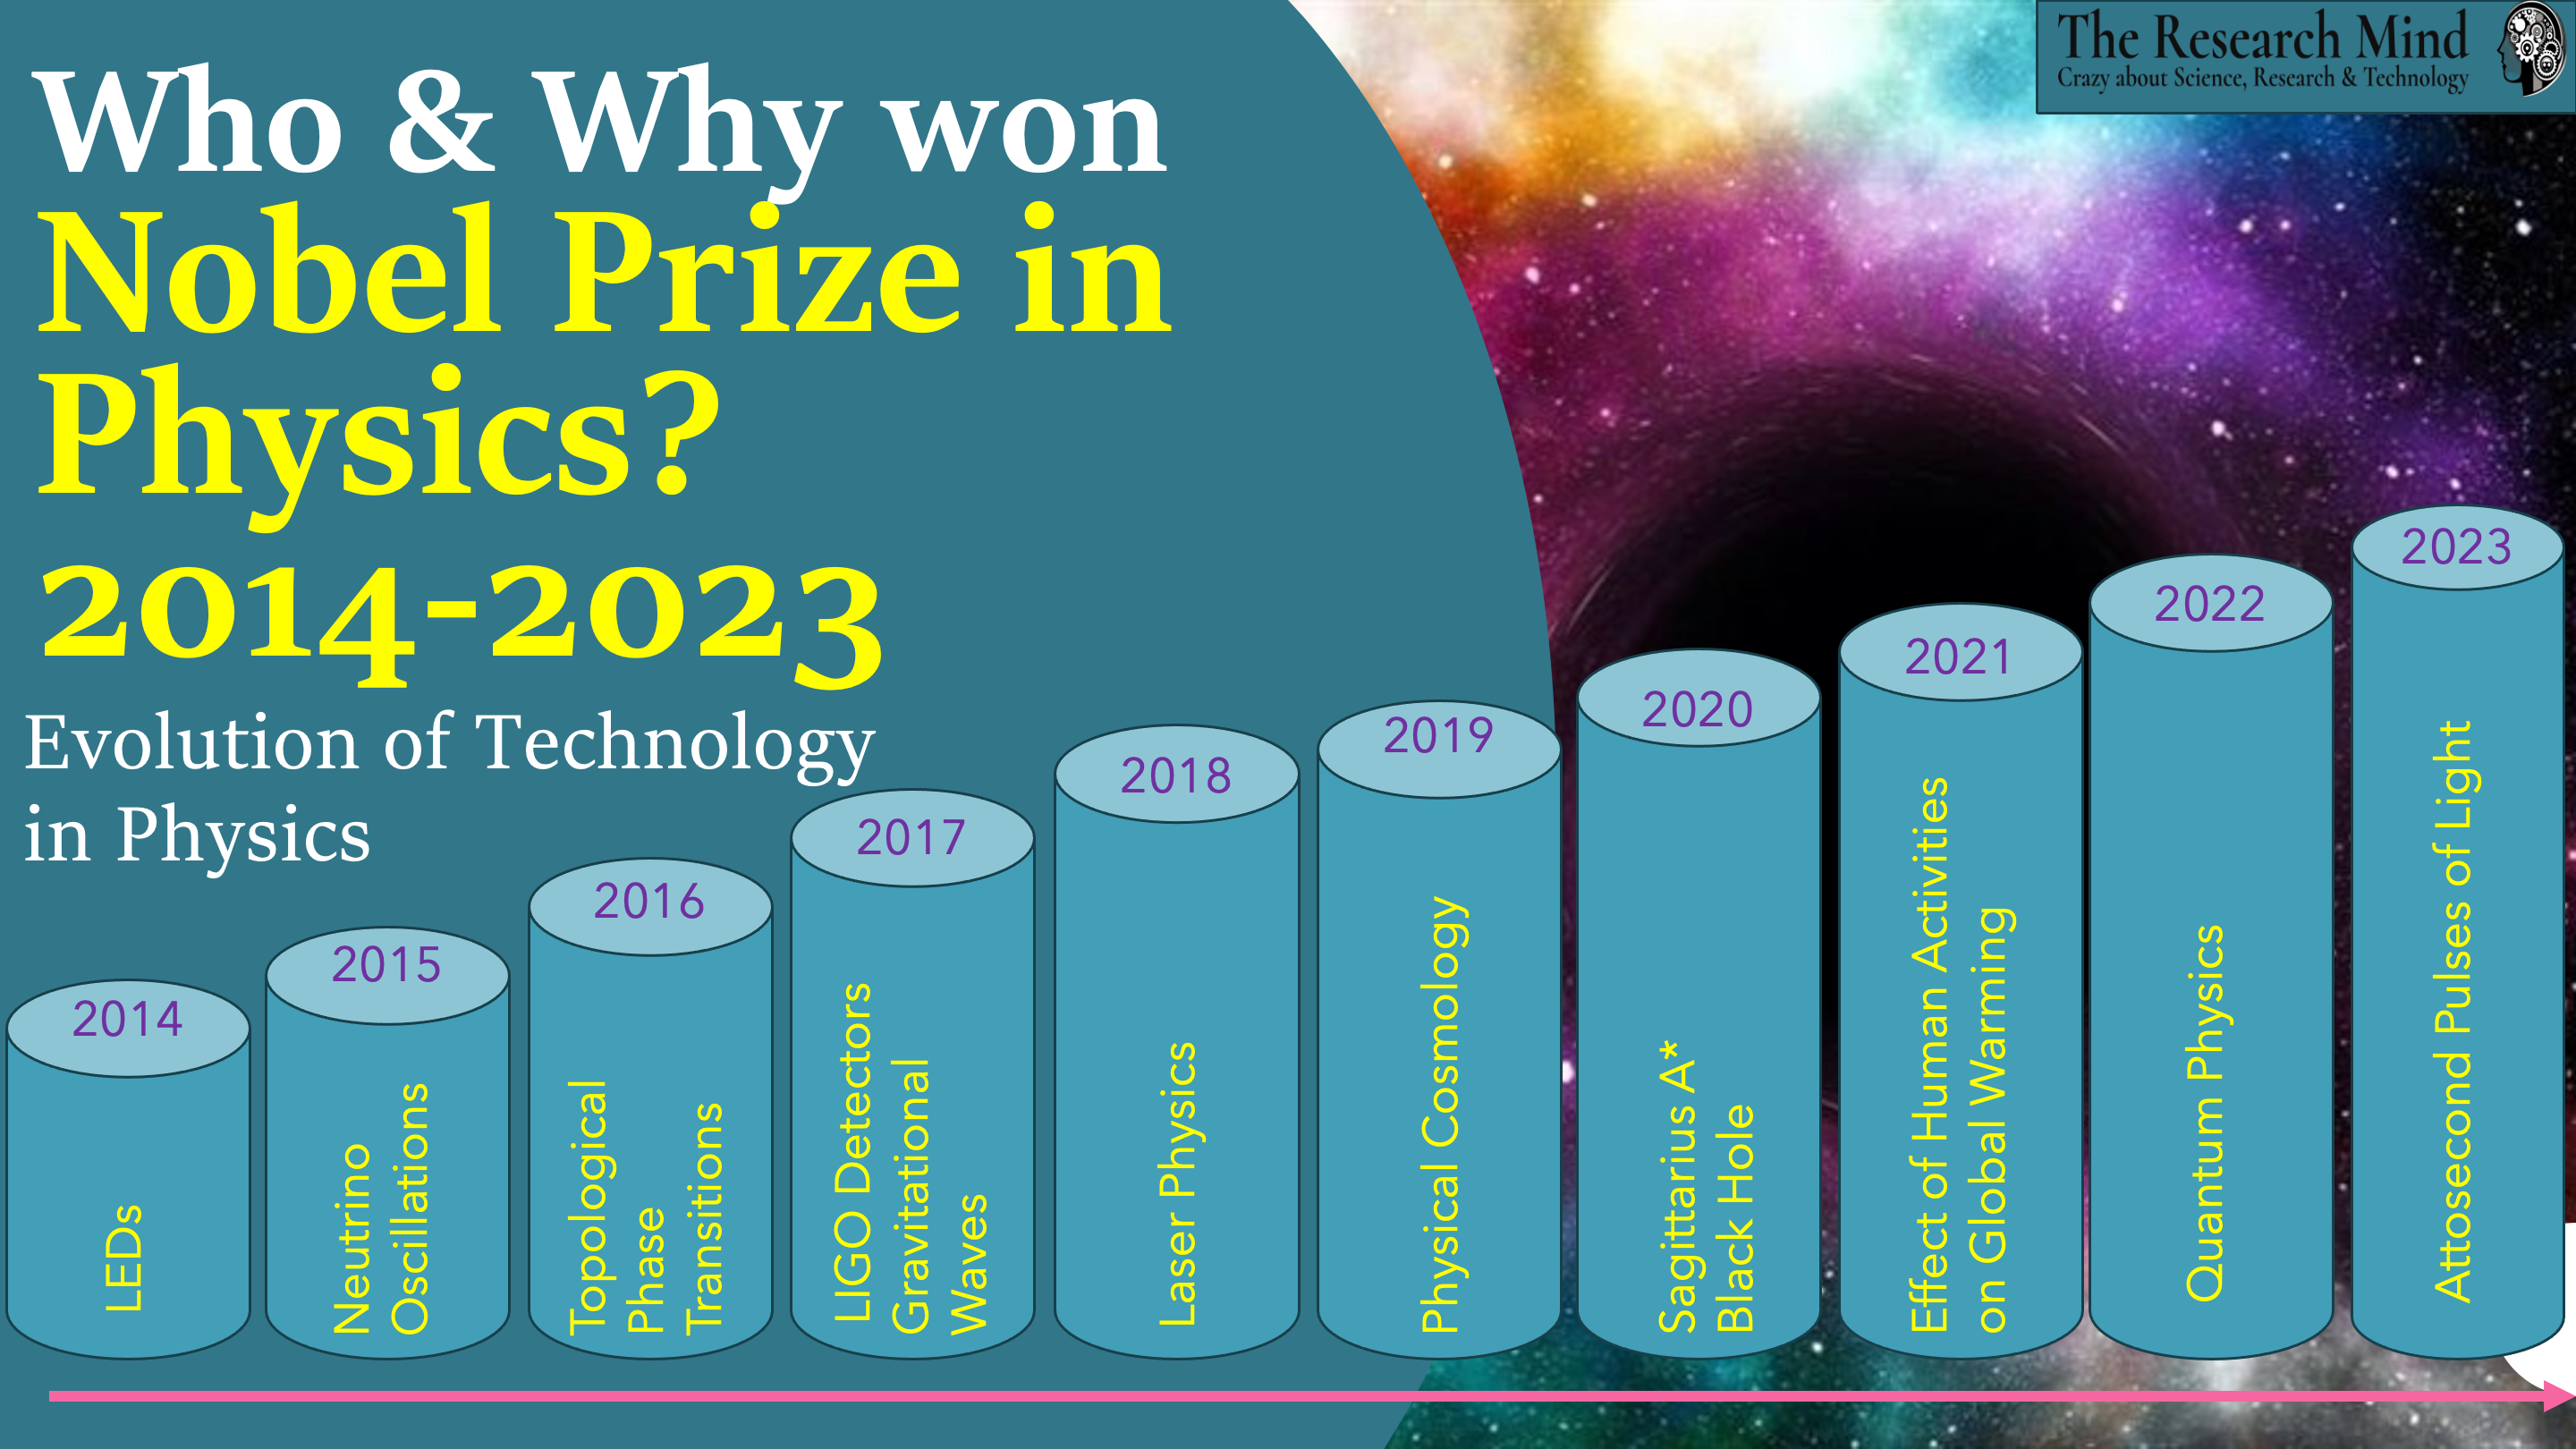 Nobel Prize in Physics: Evolution of Technology in Physics